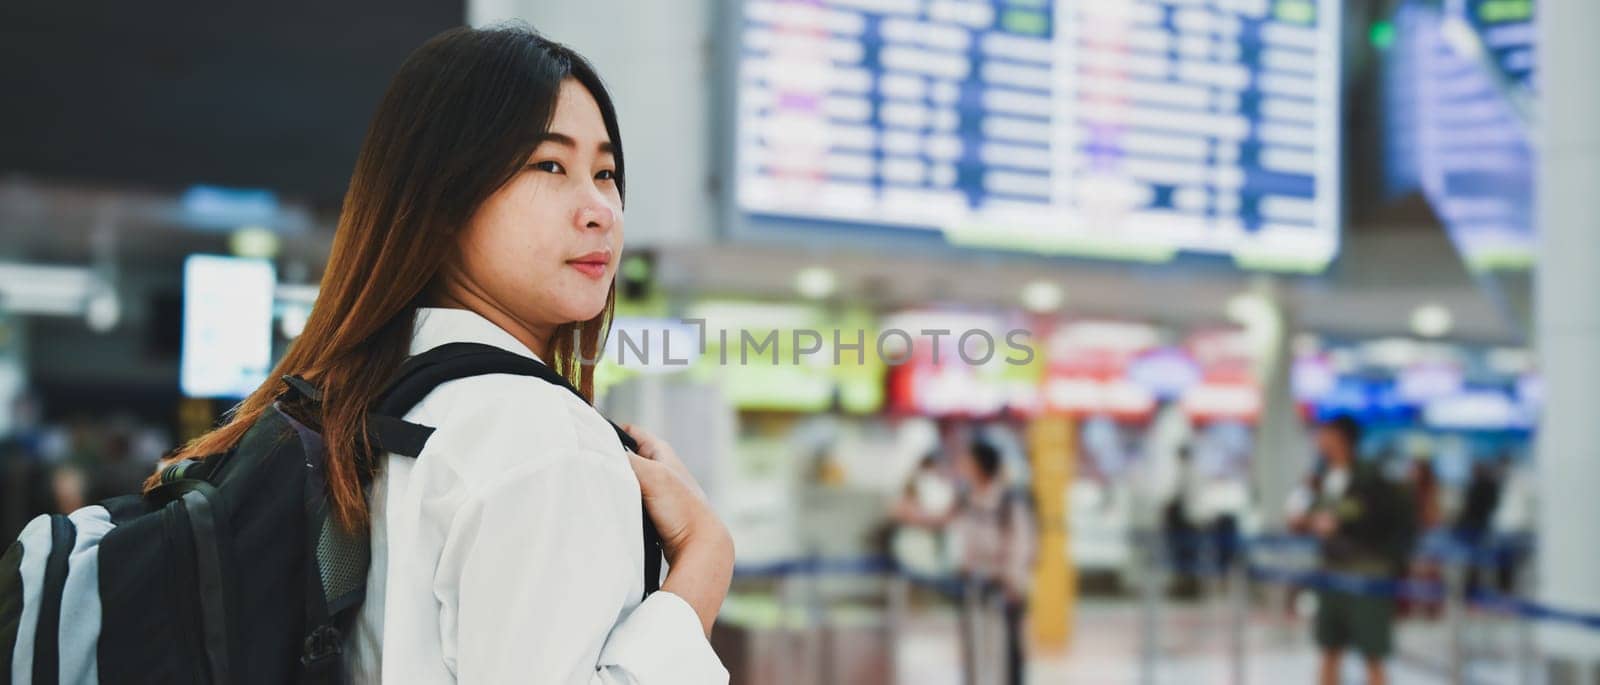 Happy young woman with backpack waiting for boarding at airport by prathanchorruangsak